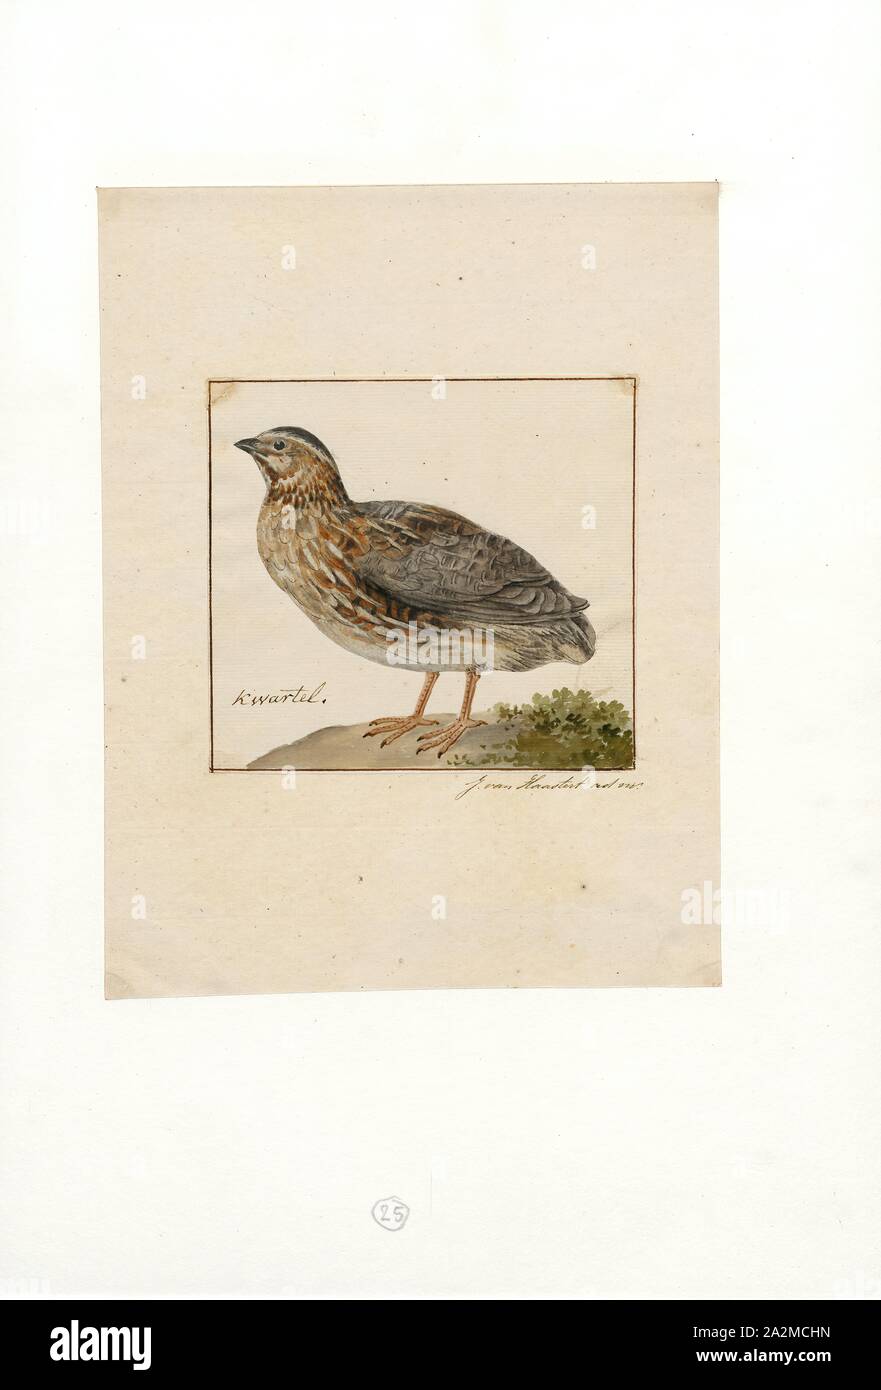 Coturnix communis, Print, Coturnix is a genus of six extant species and two known extinct species of Old World quail. The genus name is the Latin for the common quail., 1753-1834 Stock Photo